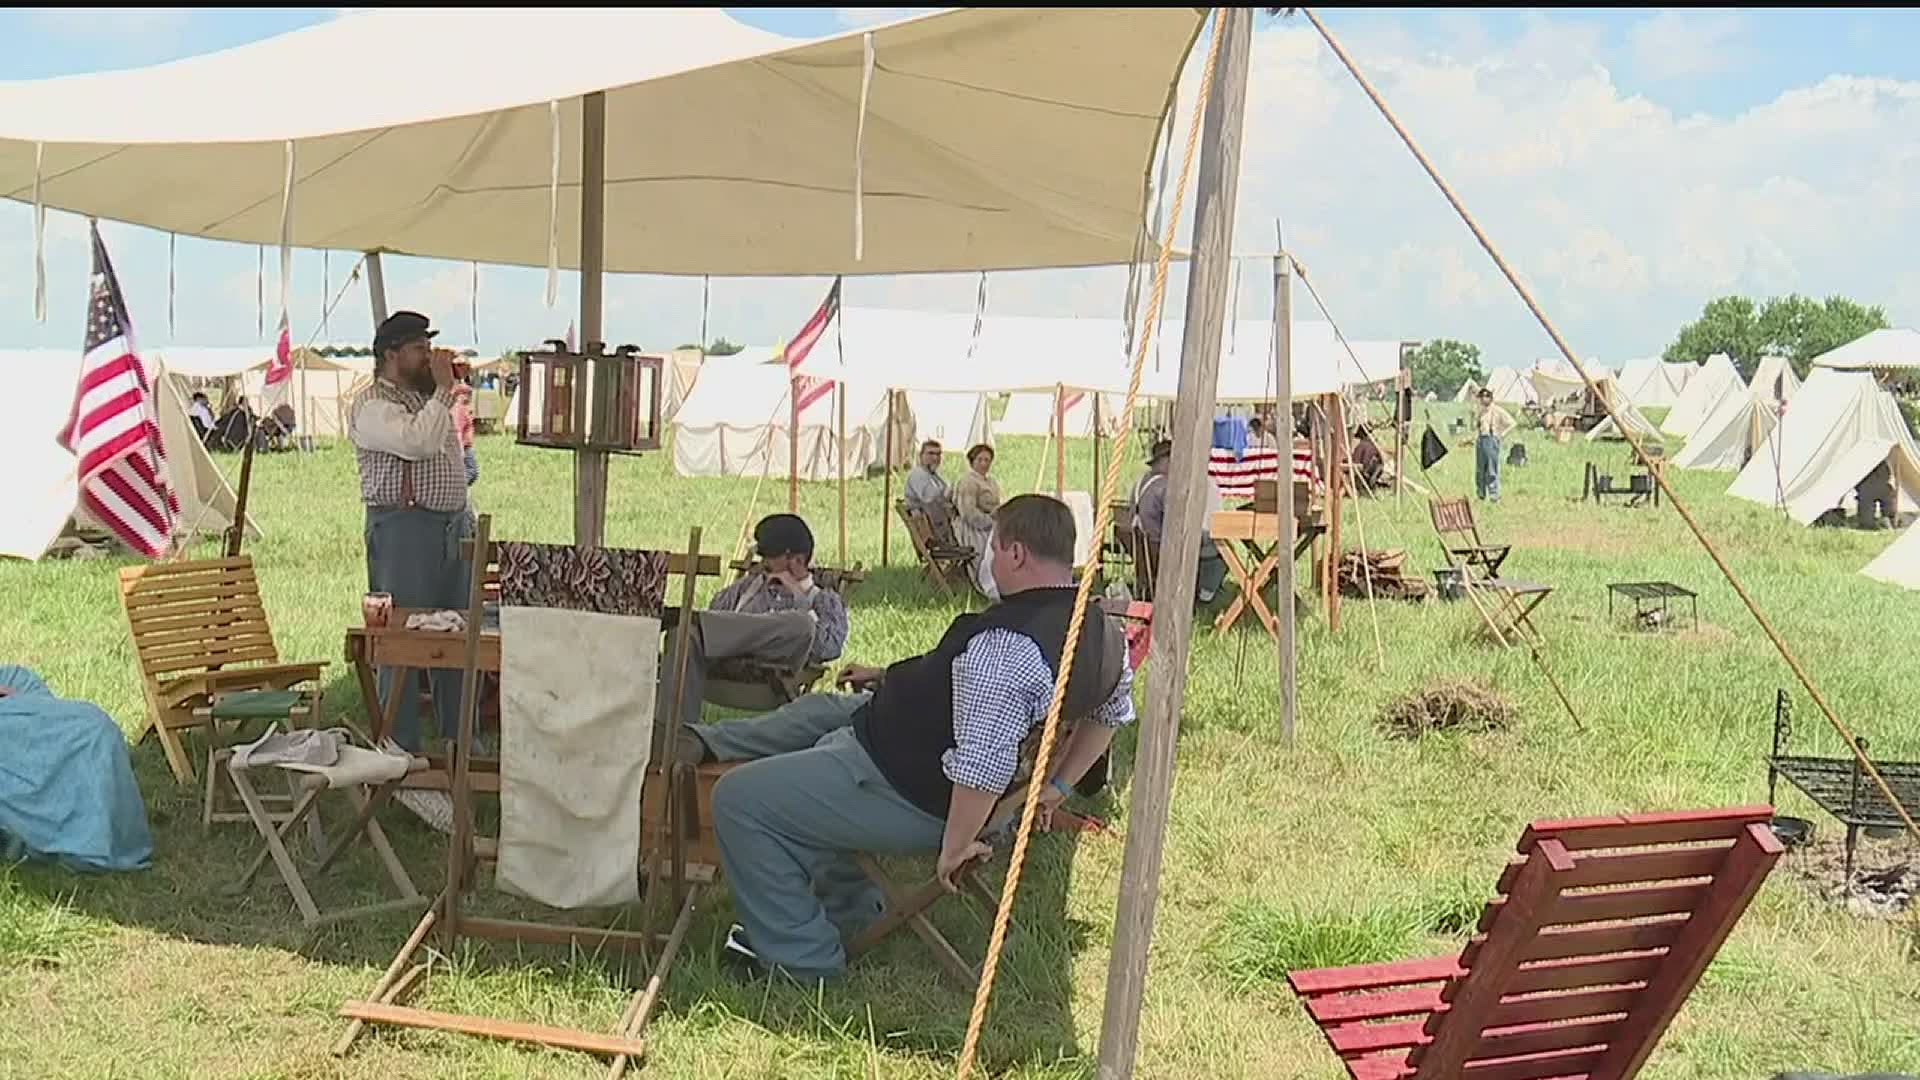 Organizers say re-enactors are 'chomping at the bit' to participate in an evento